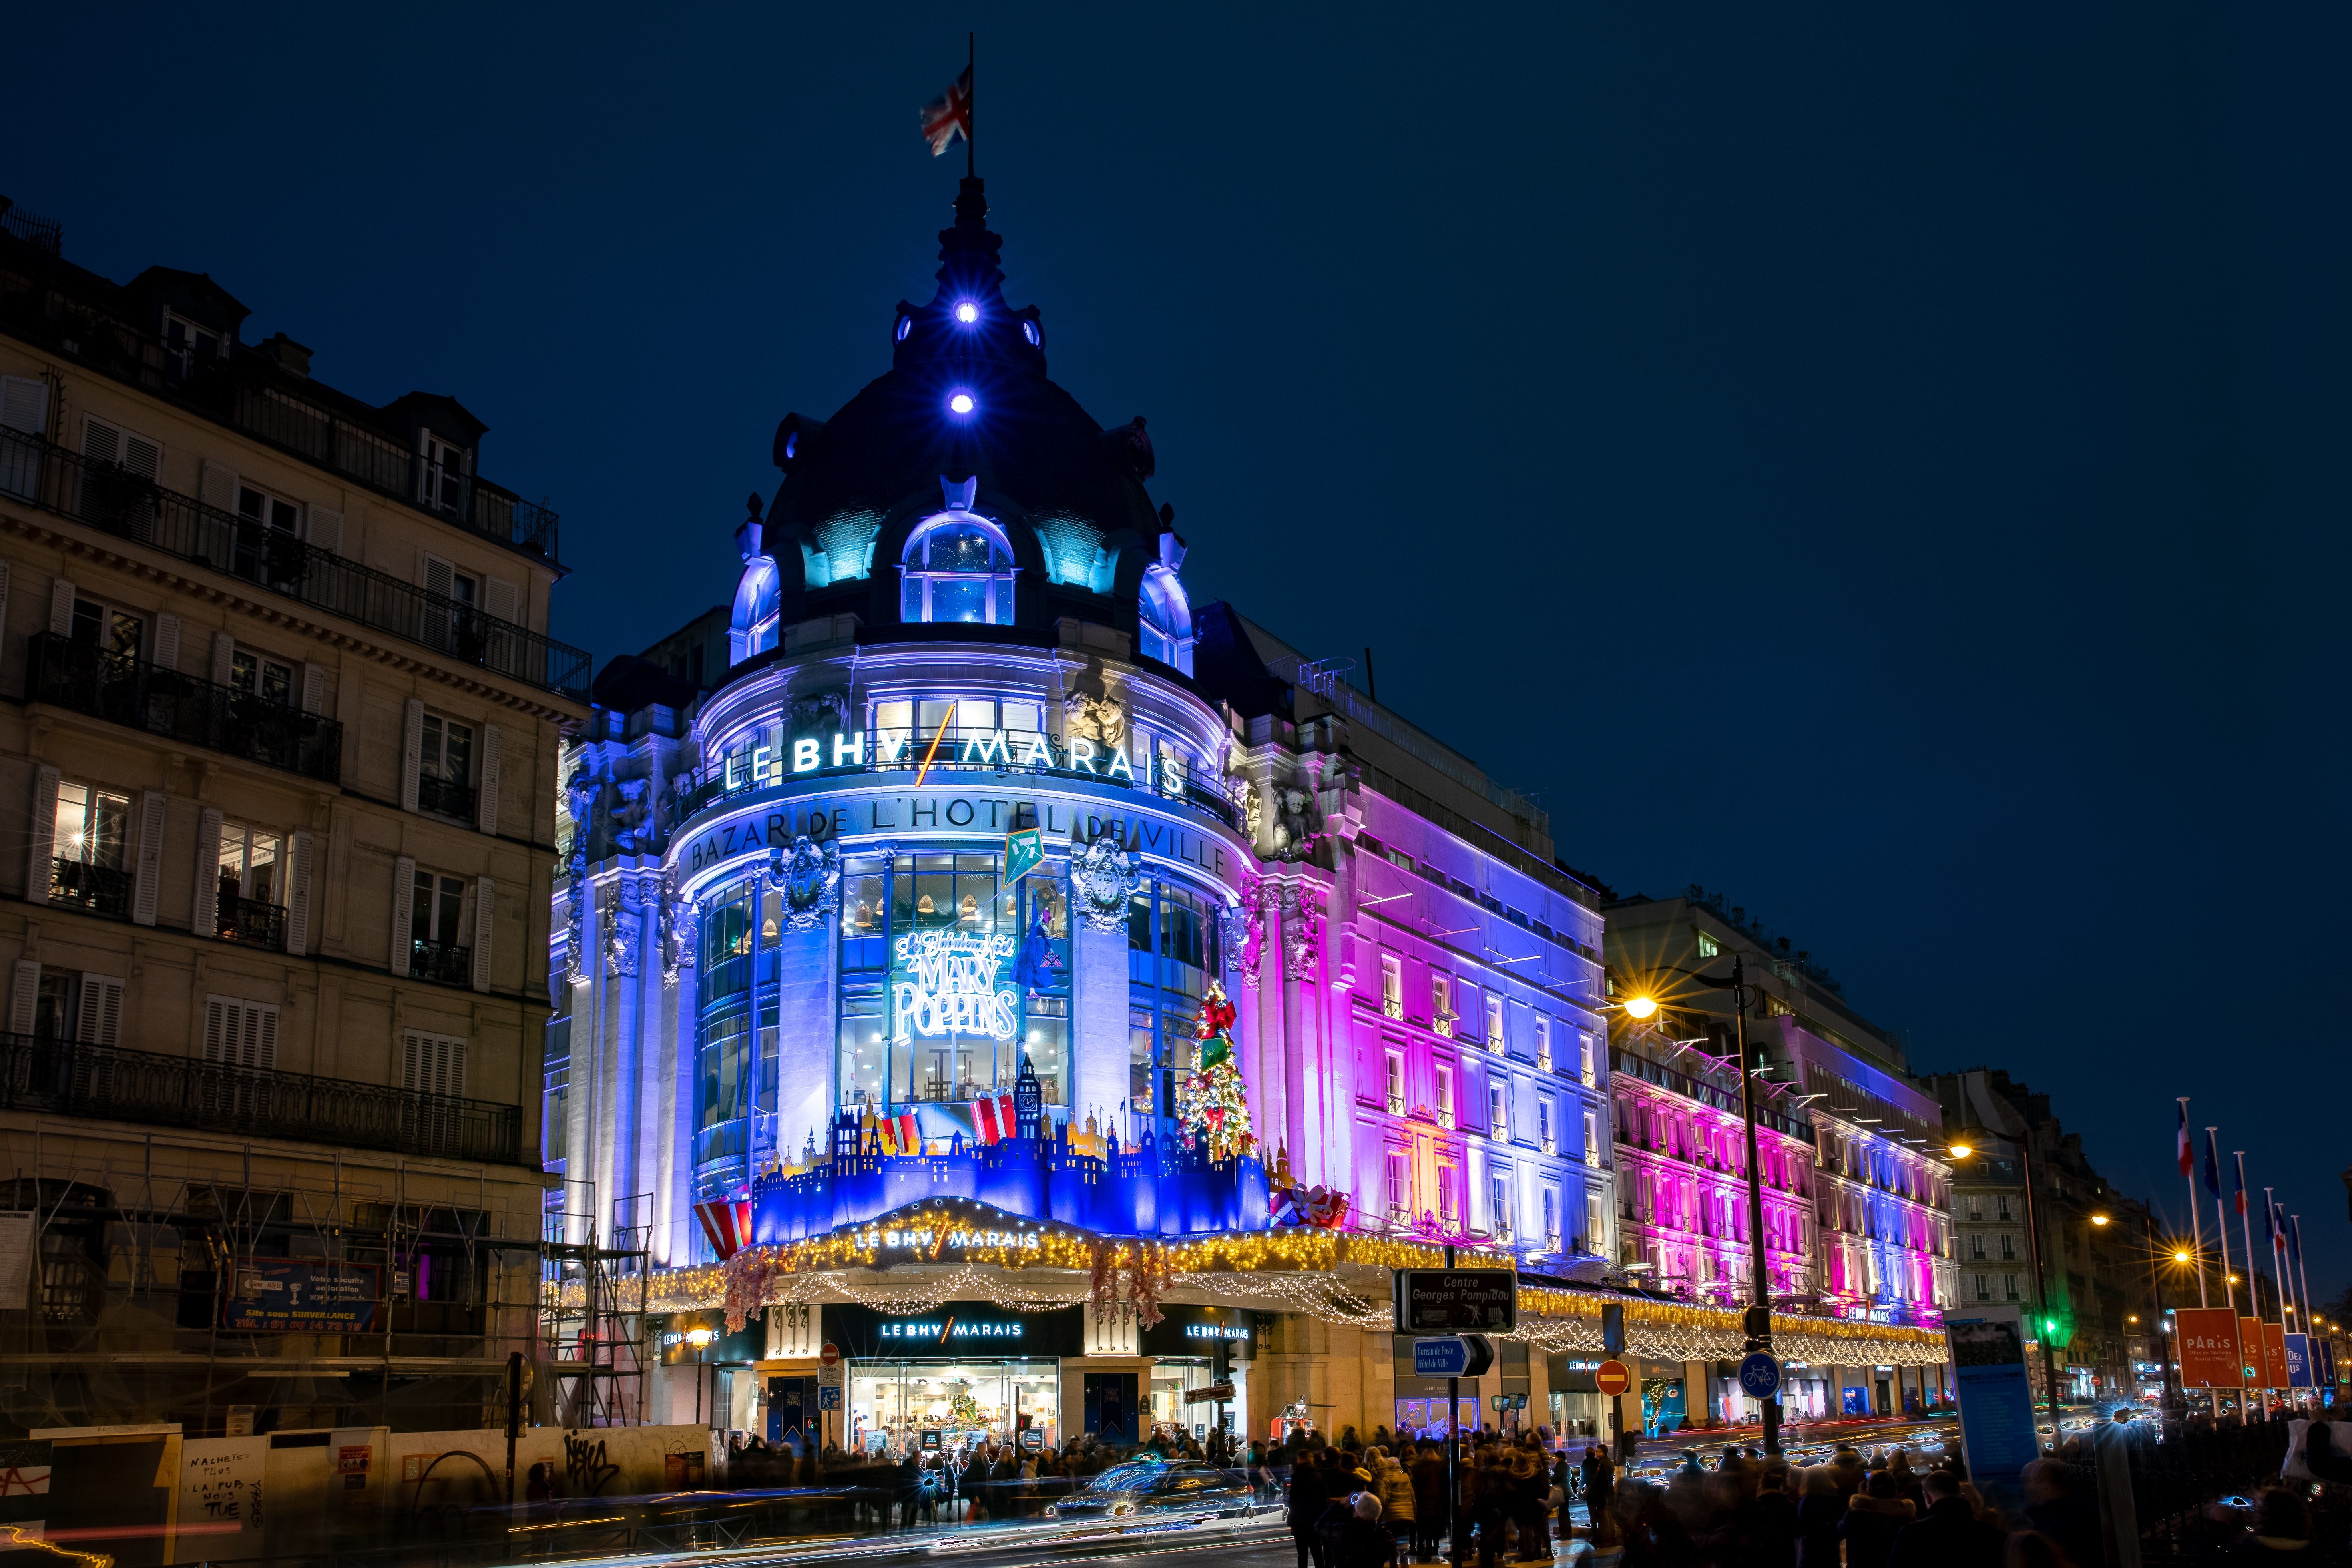 The BHV department store lit up at night in Le Marais in Paris, France